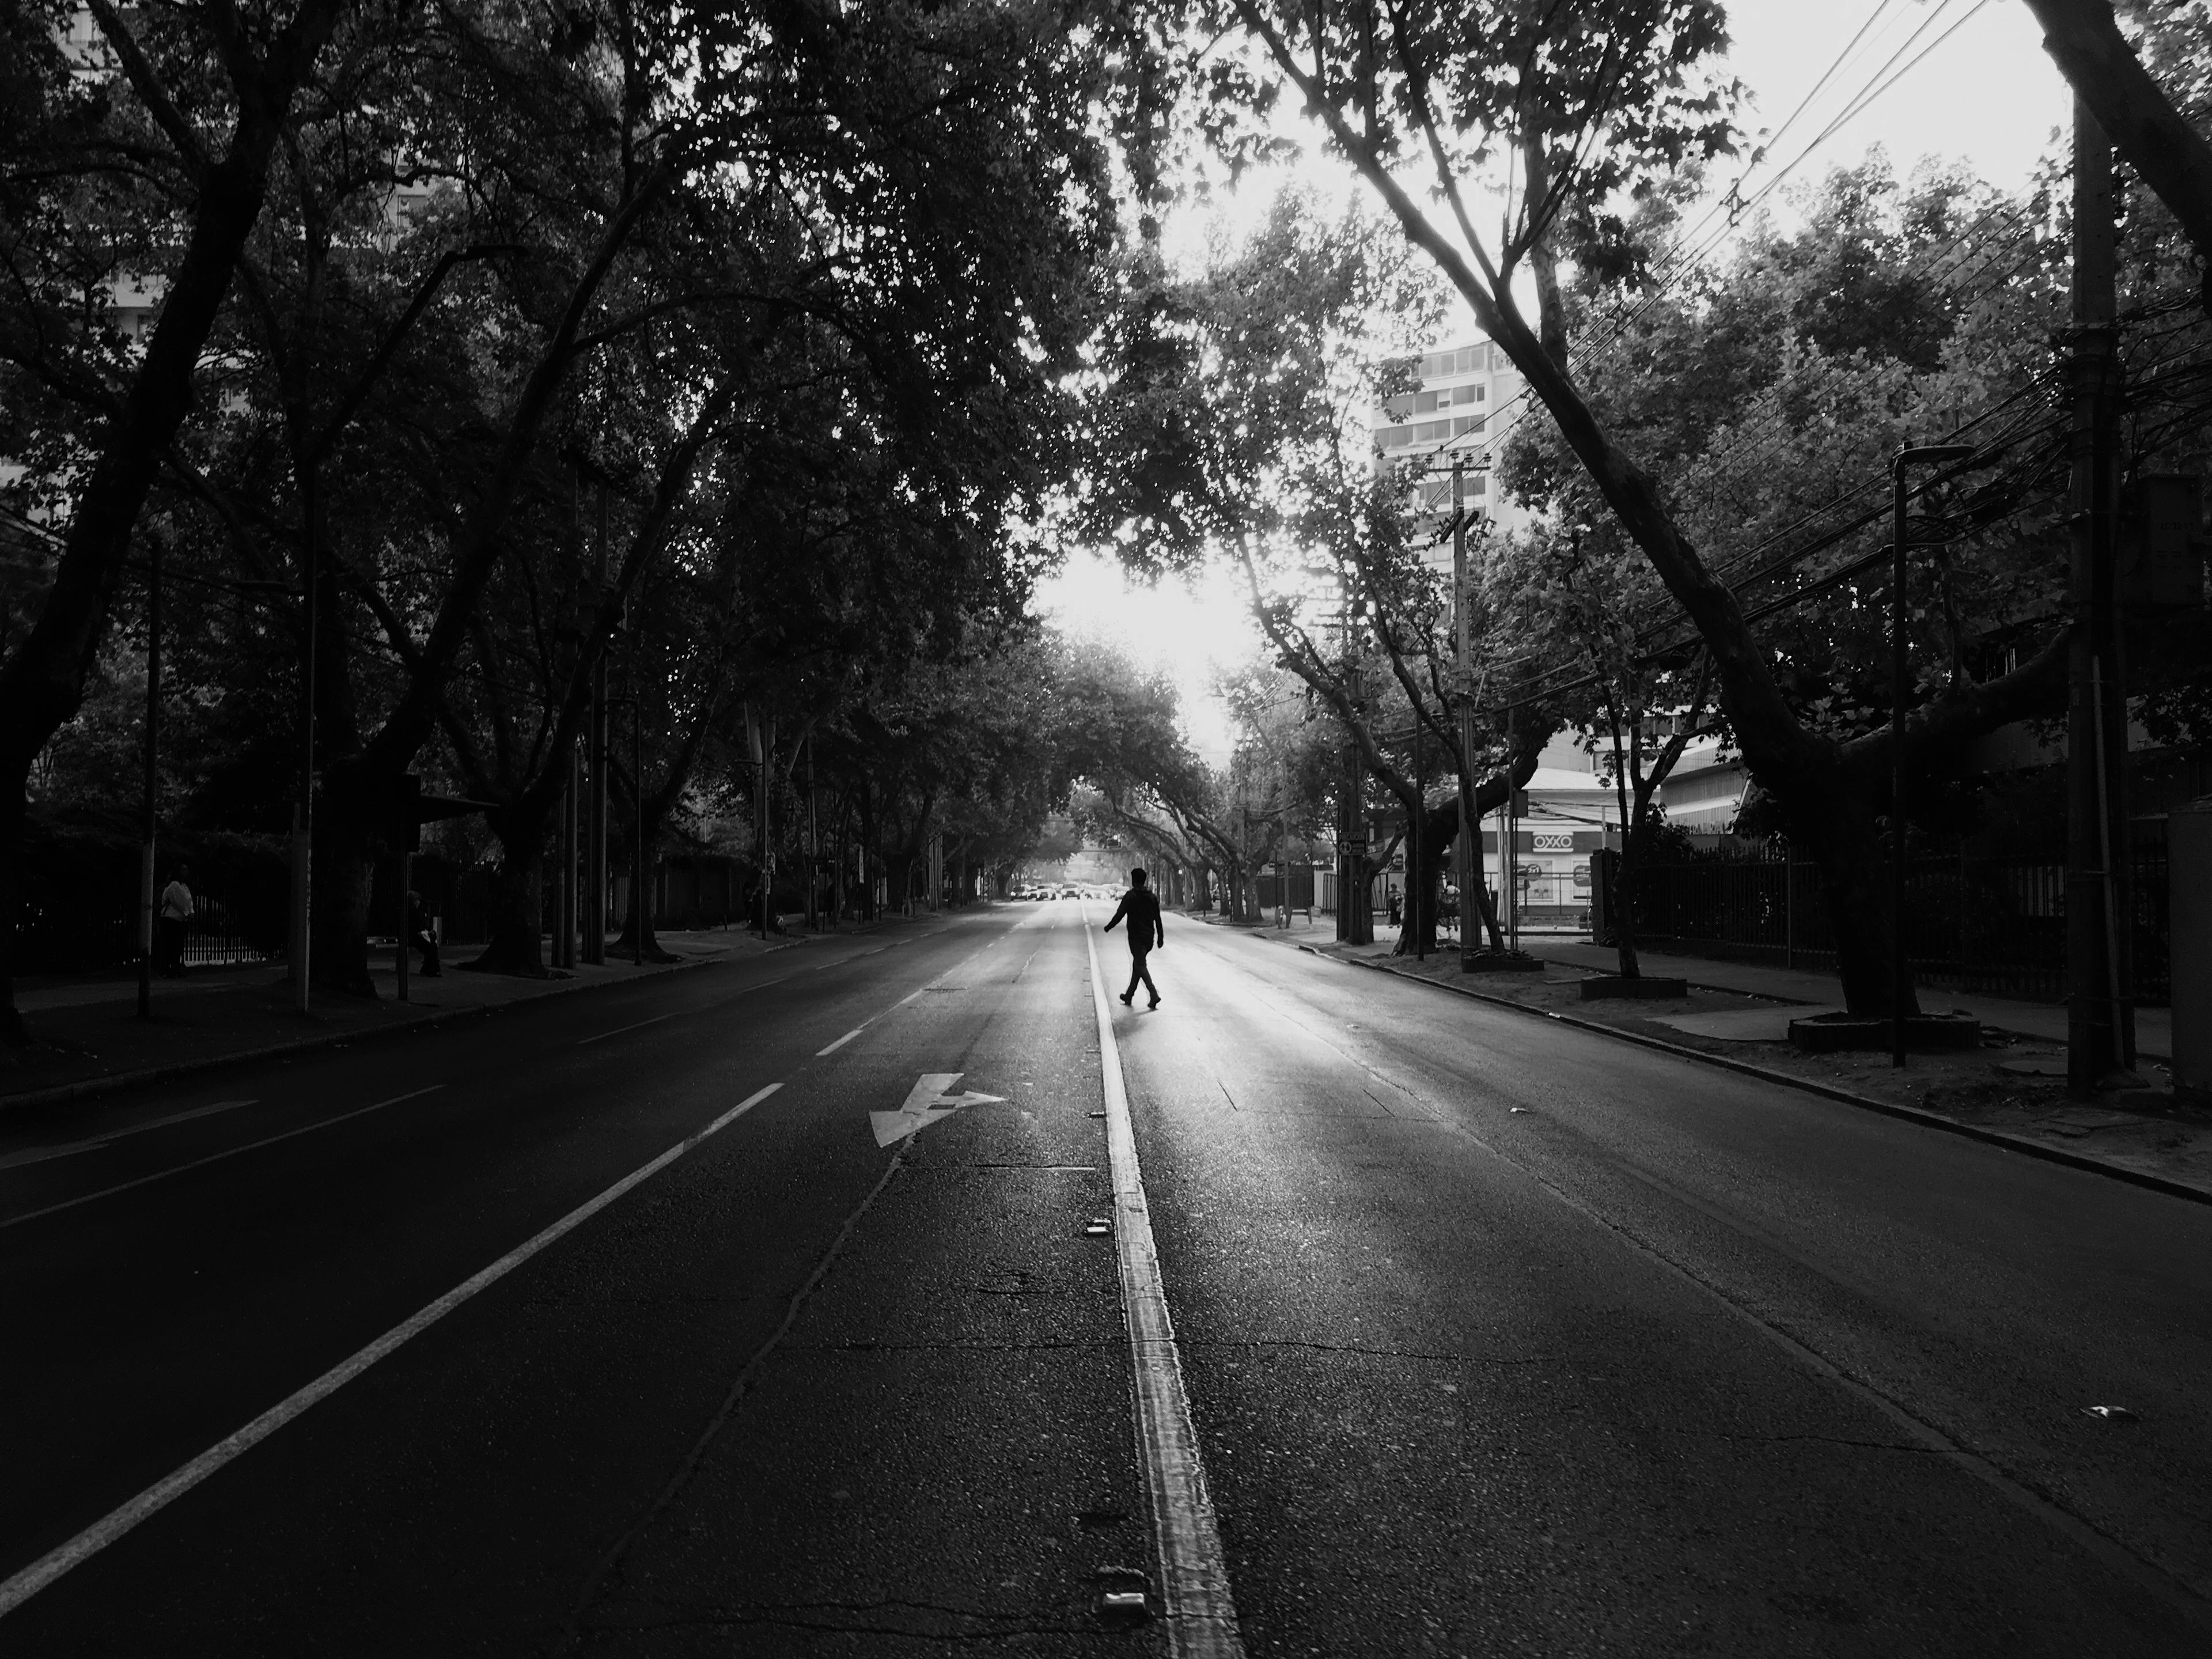 Dark, black and white image of a nearly empty street with the sillouette of a man crossing in the middle. The slighly blurred light comming from the back of the street trees gives the image a dreamy look.